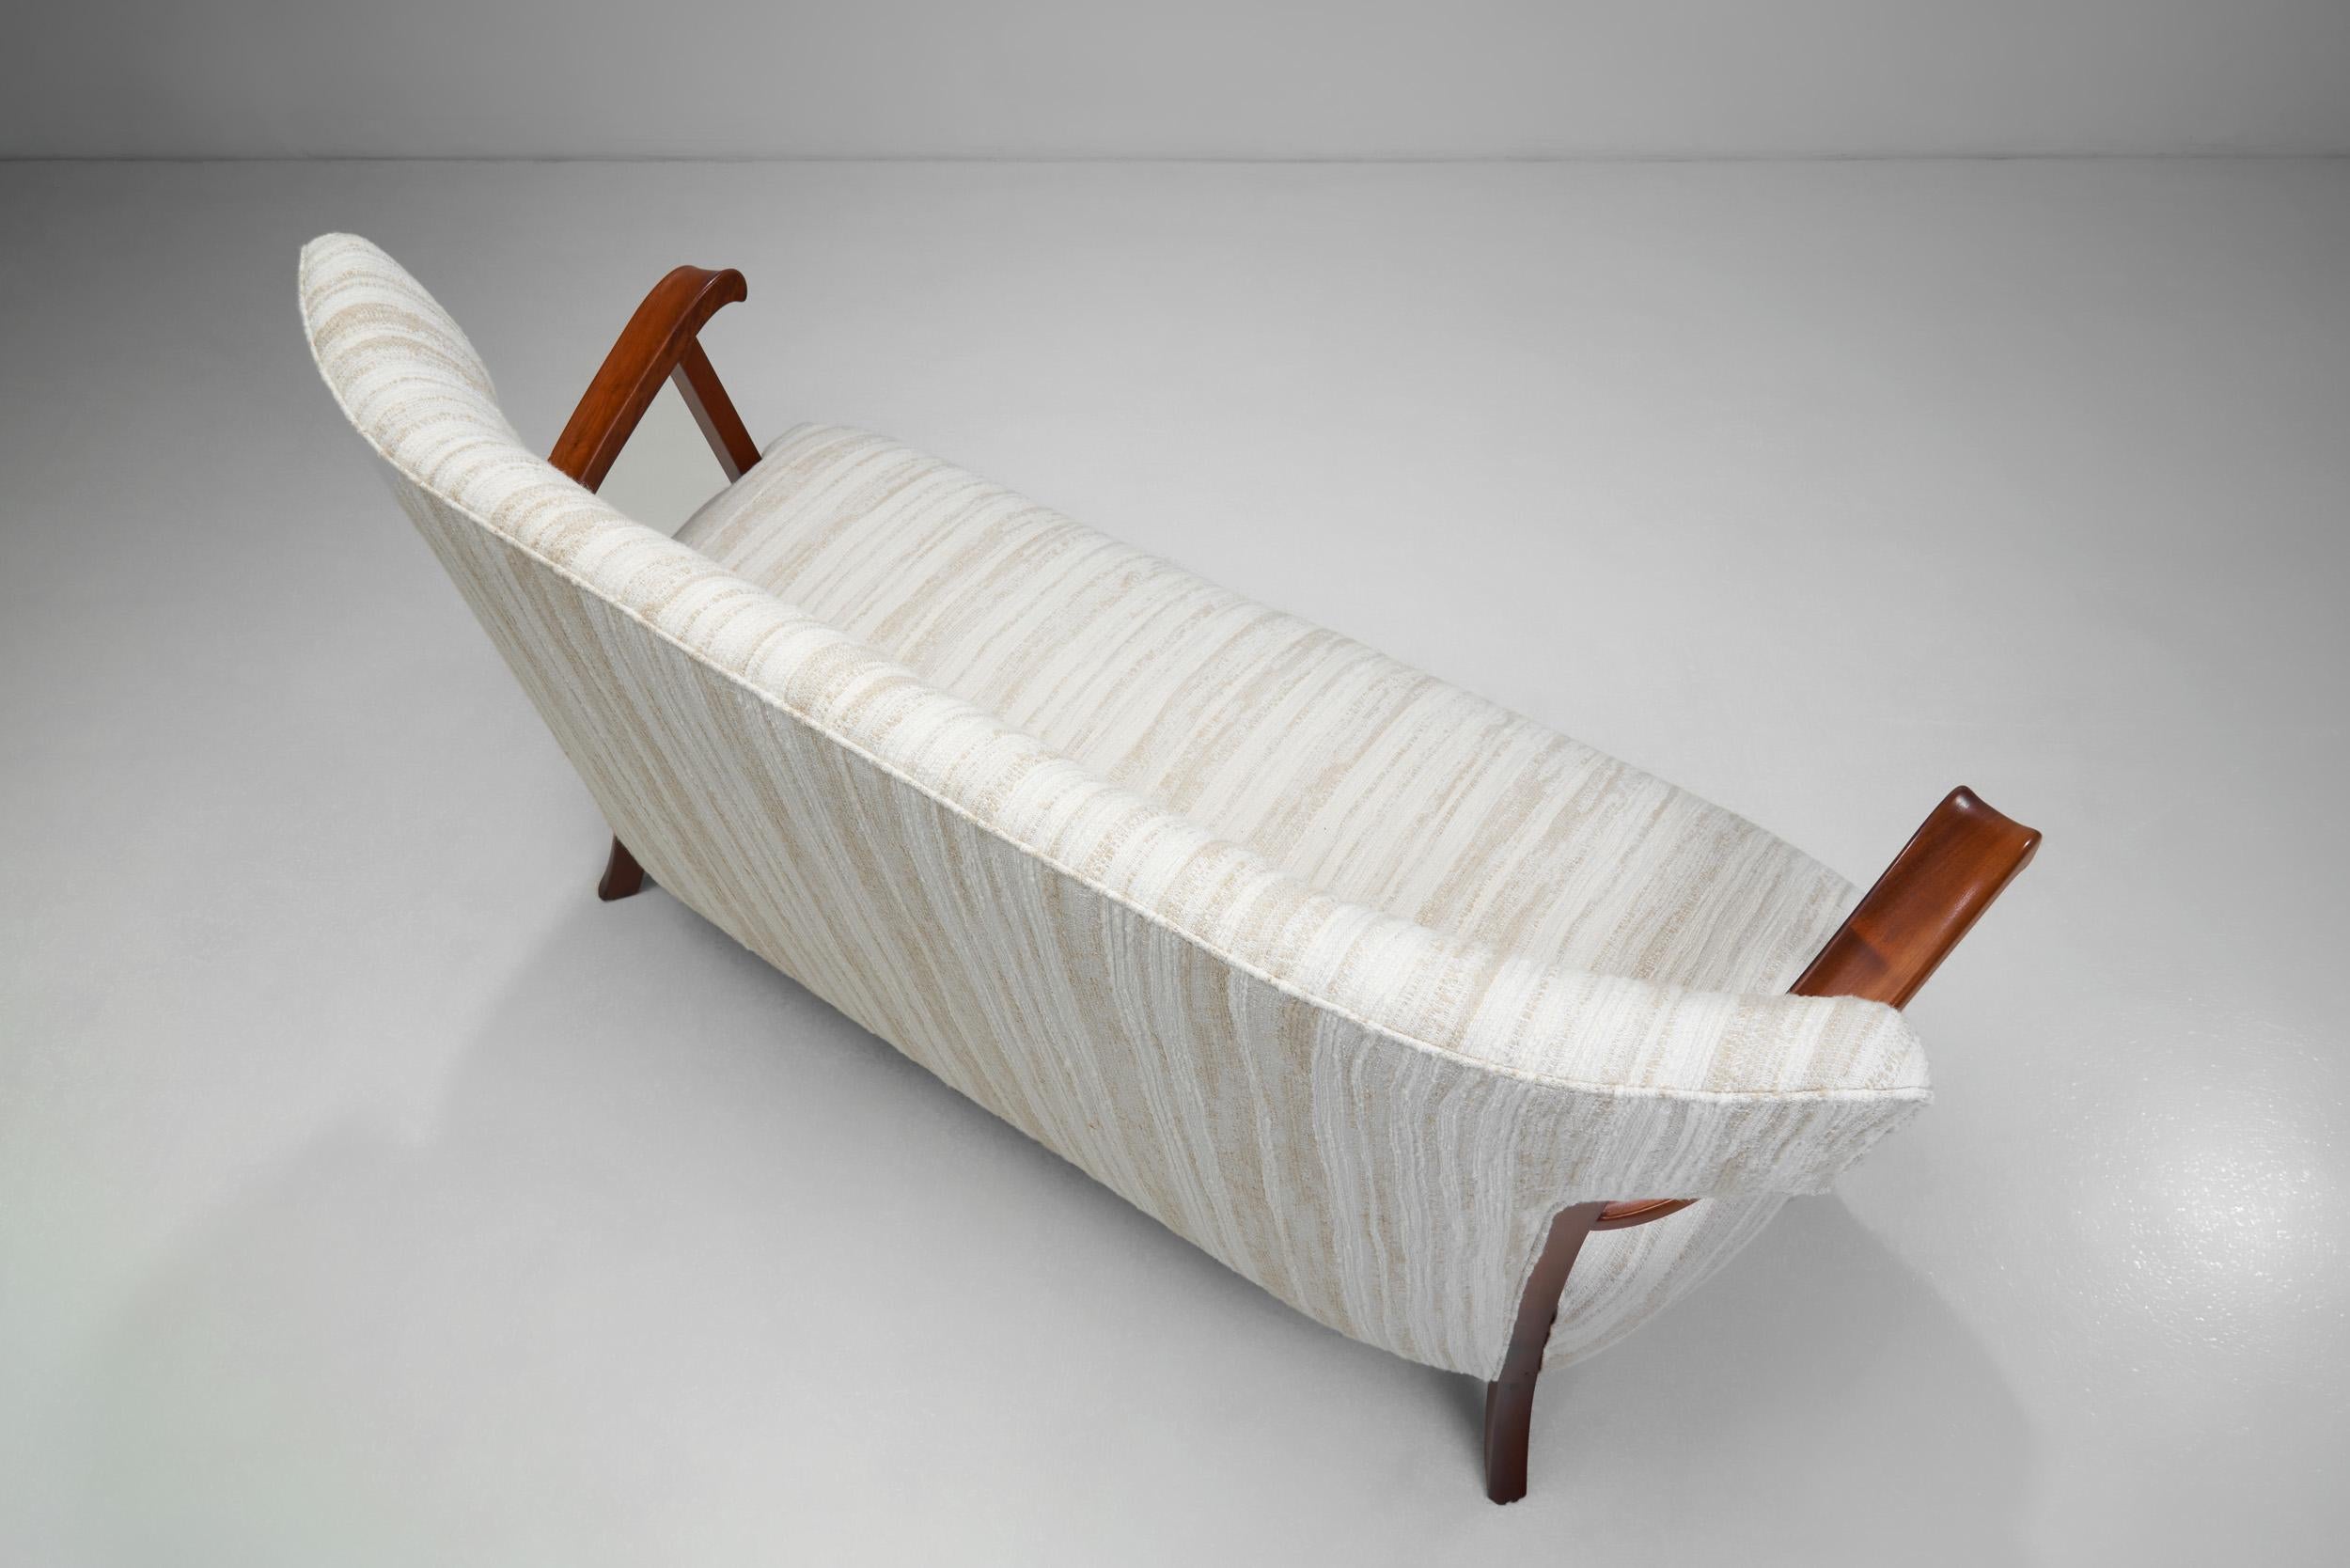 Sculptural Danish Cabinetmaker Sofa with Exotic Wood Frame, Denmark 1940s For Sale 1